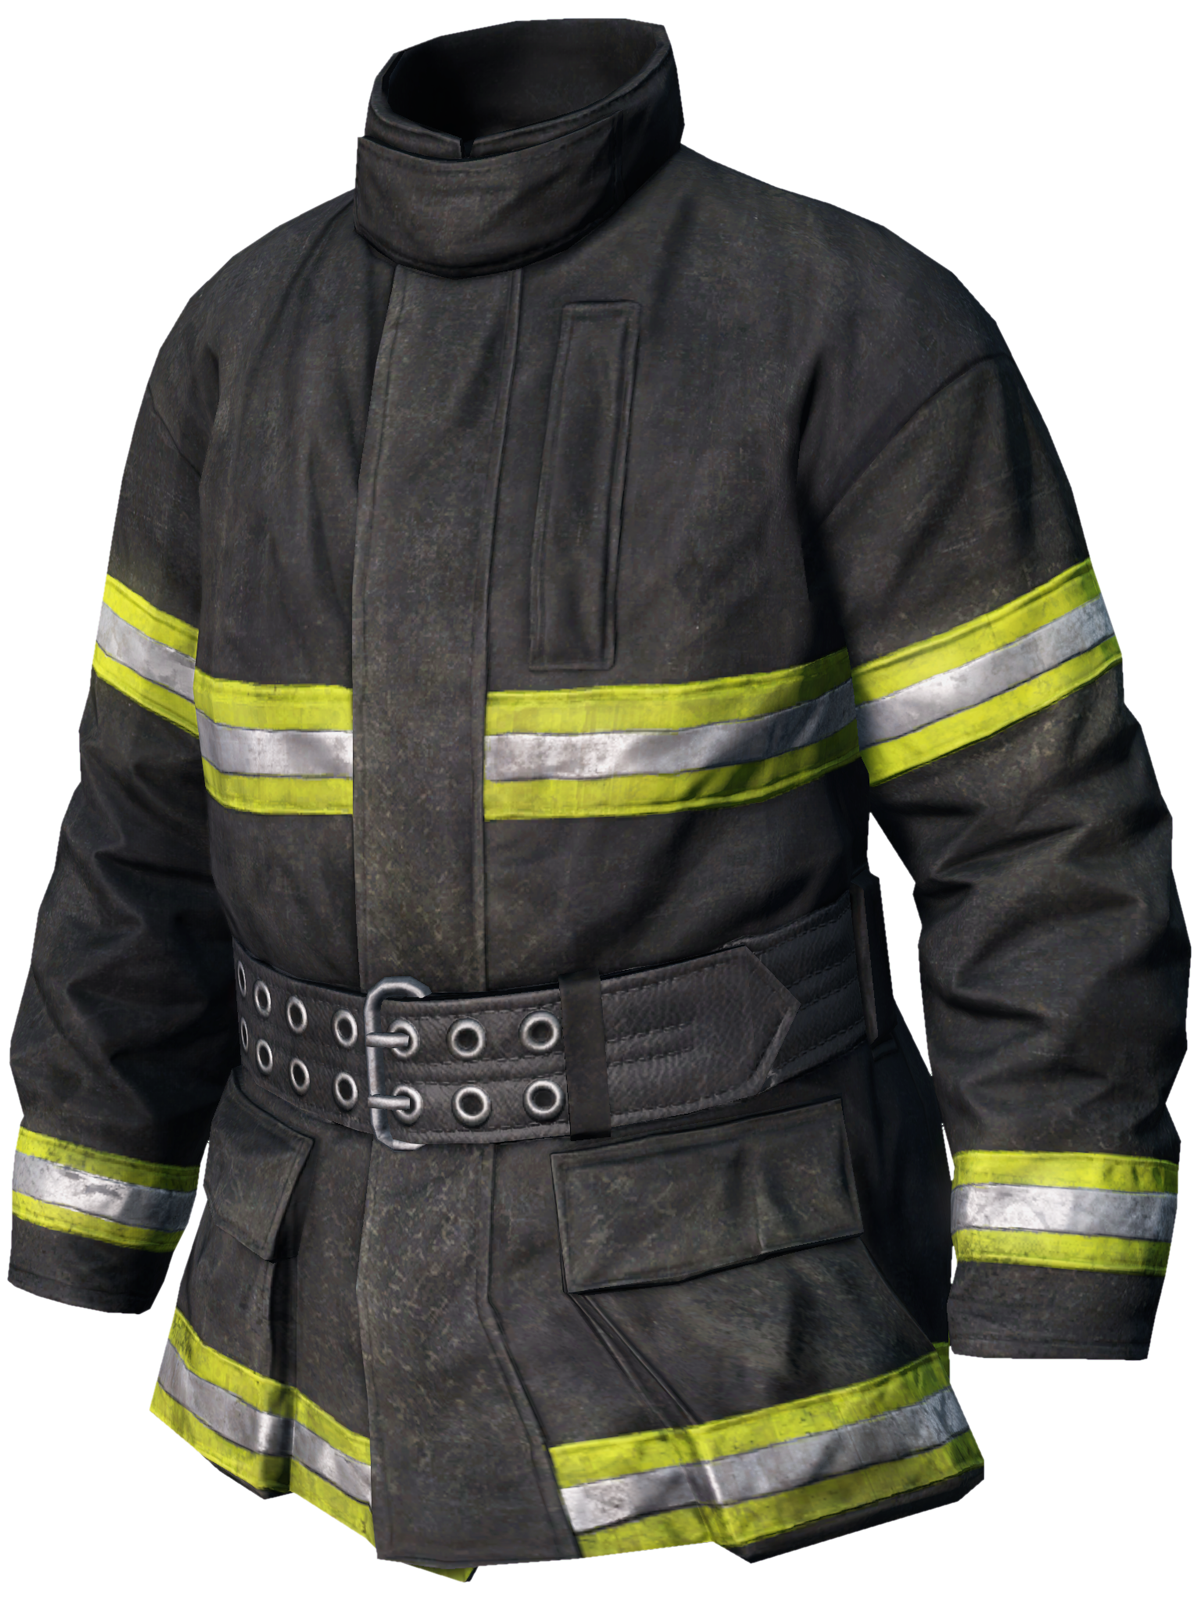 Emergency Services Uniforms UK & Ireland – Police, Firefighter Station Wear  and Military Uniforms